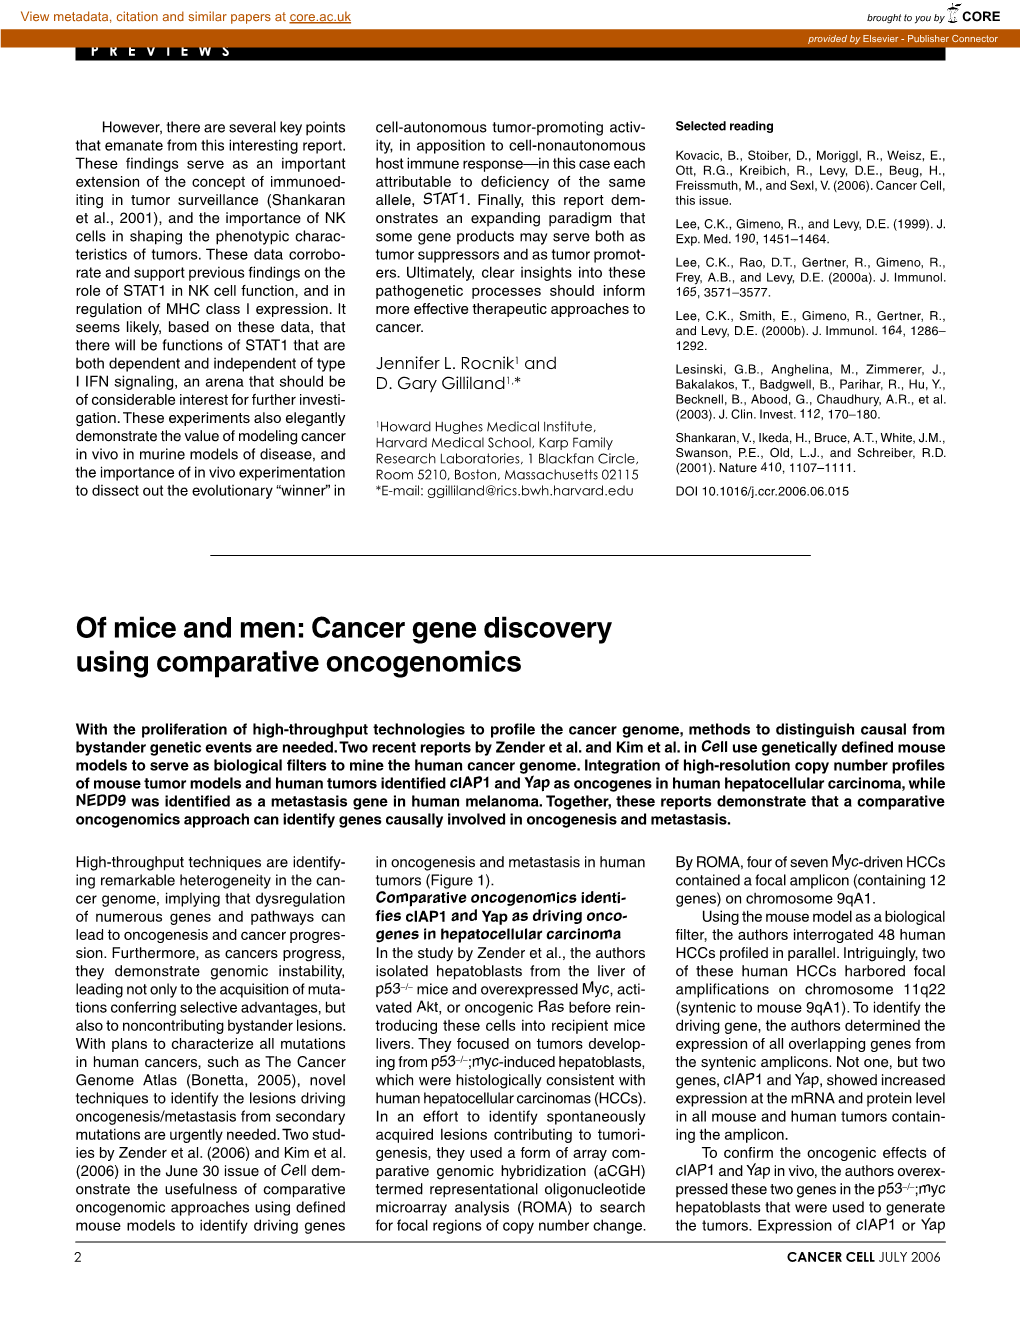 Cancer Gene Discovery Using Comparative Oncogenomics